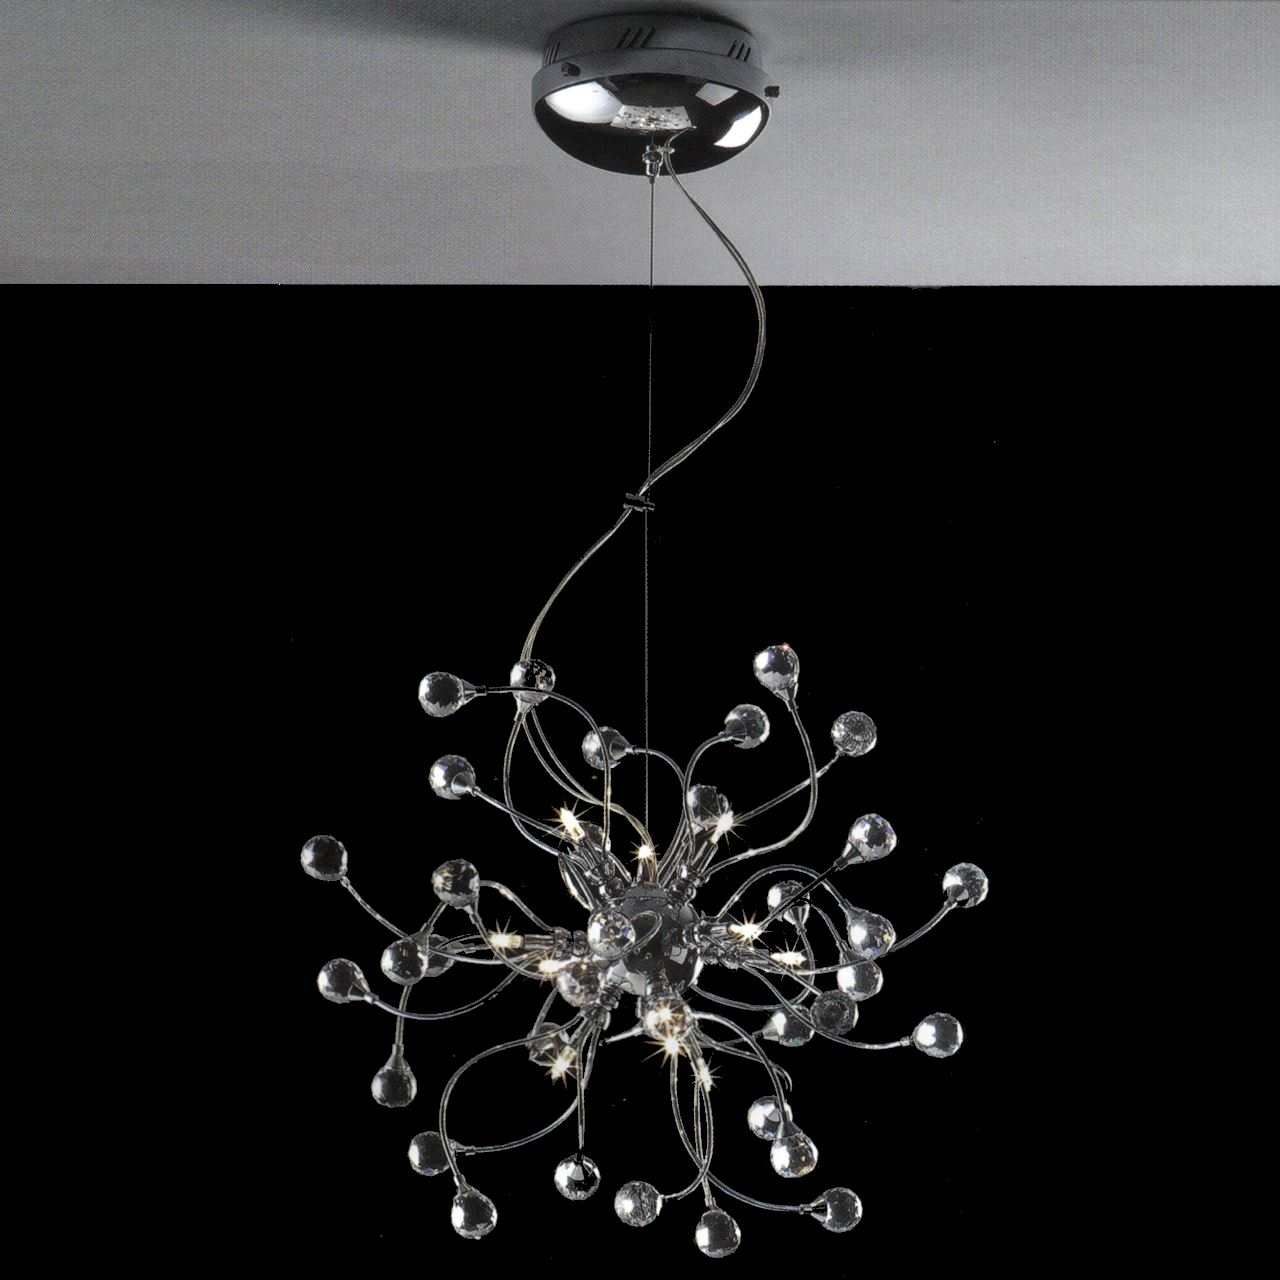 Brizzo Lighting Stores 18 Sfera Modern Crystal Round Chandelier Throughout Modern Chrome Chandeliers (View 9 of 15)